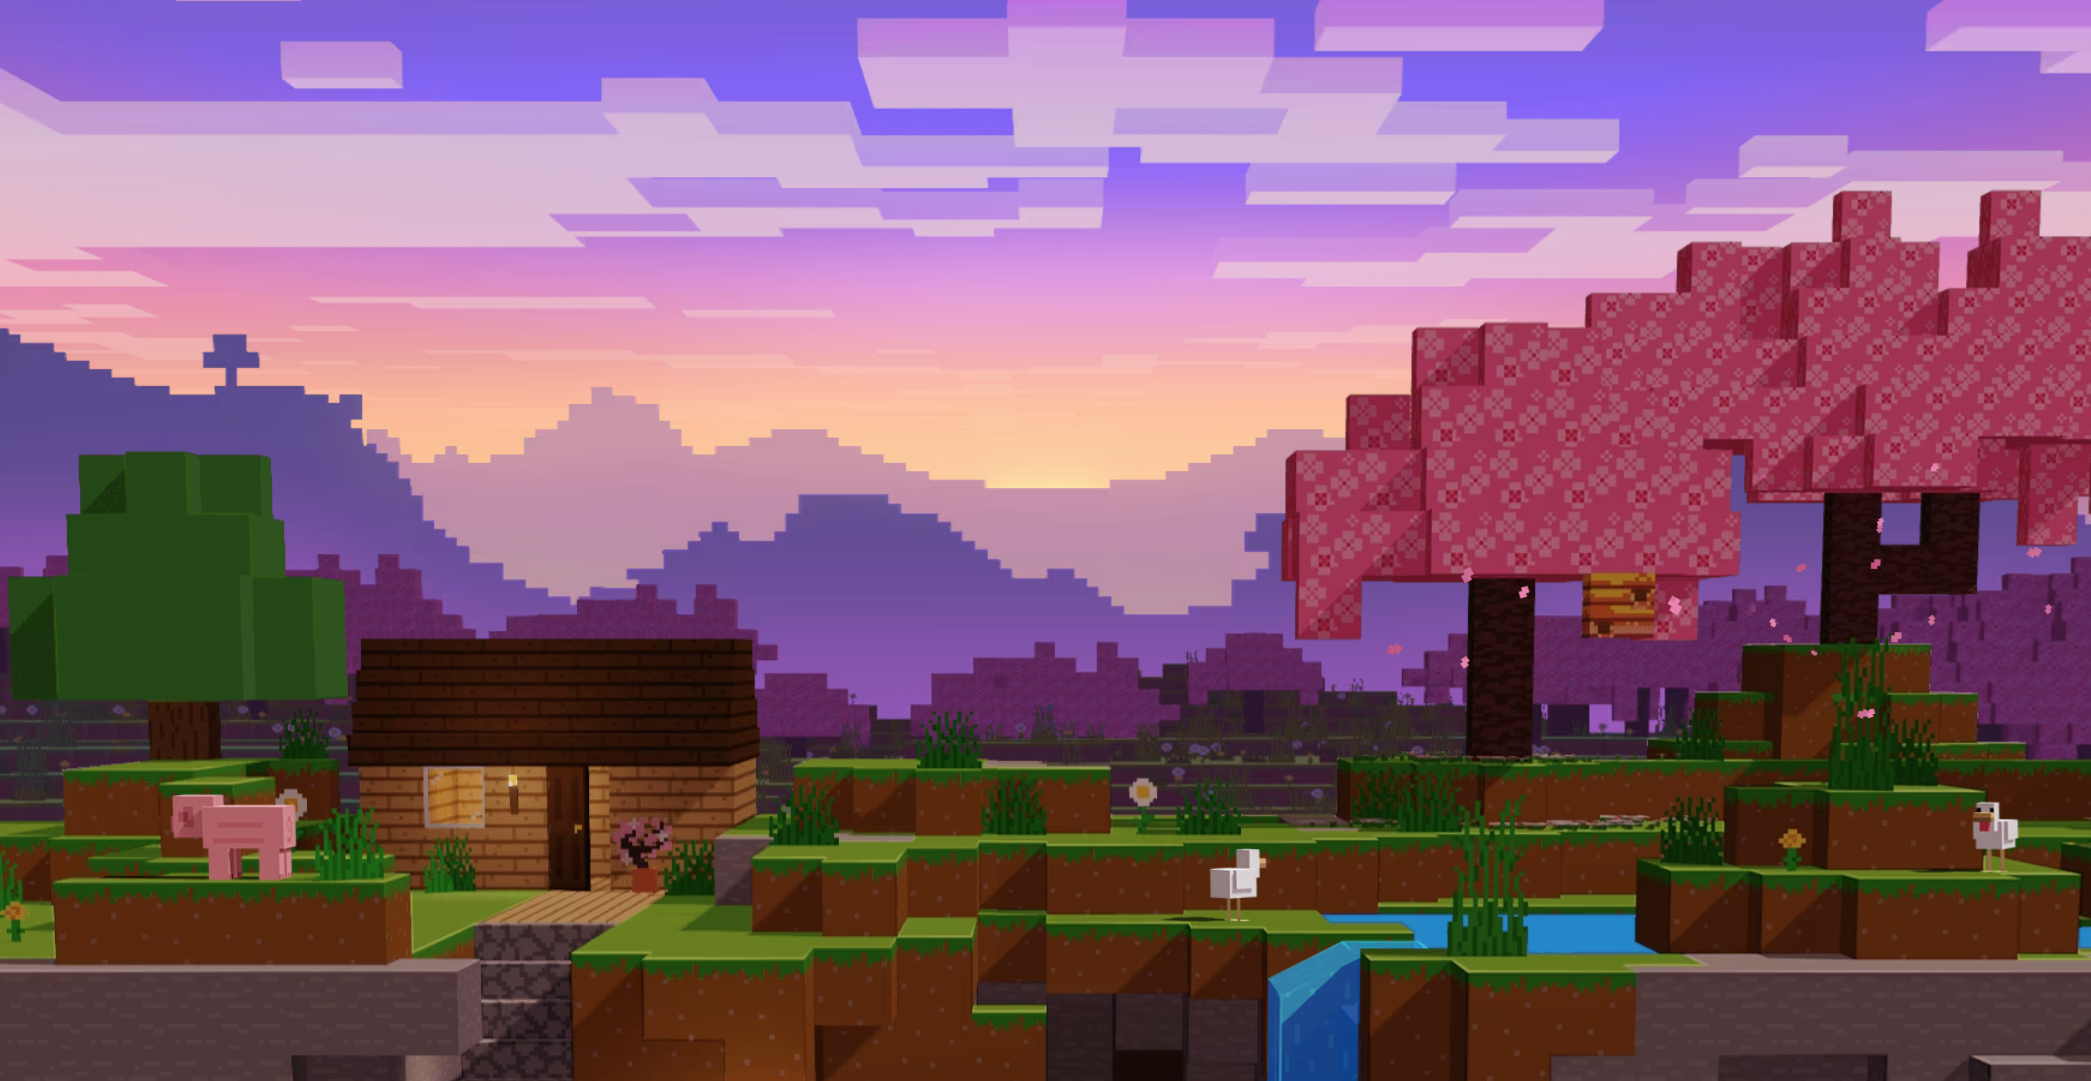 Minecraft background, with mincraft sakura tree with beehive, house and a pig